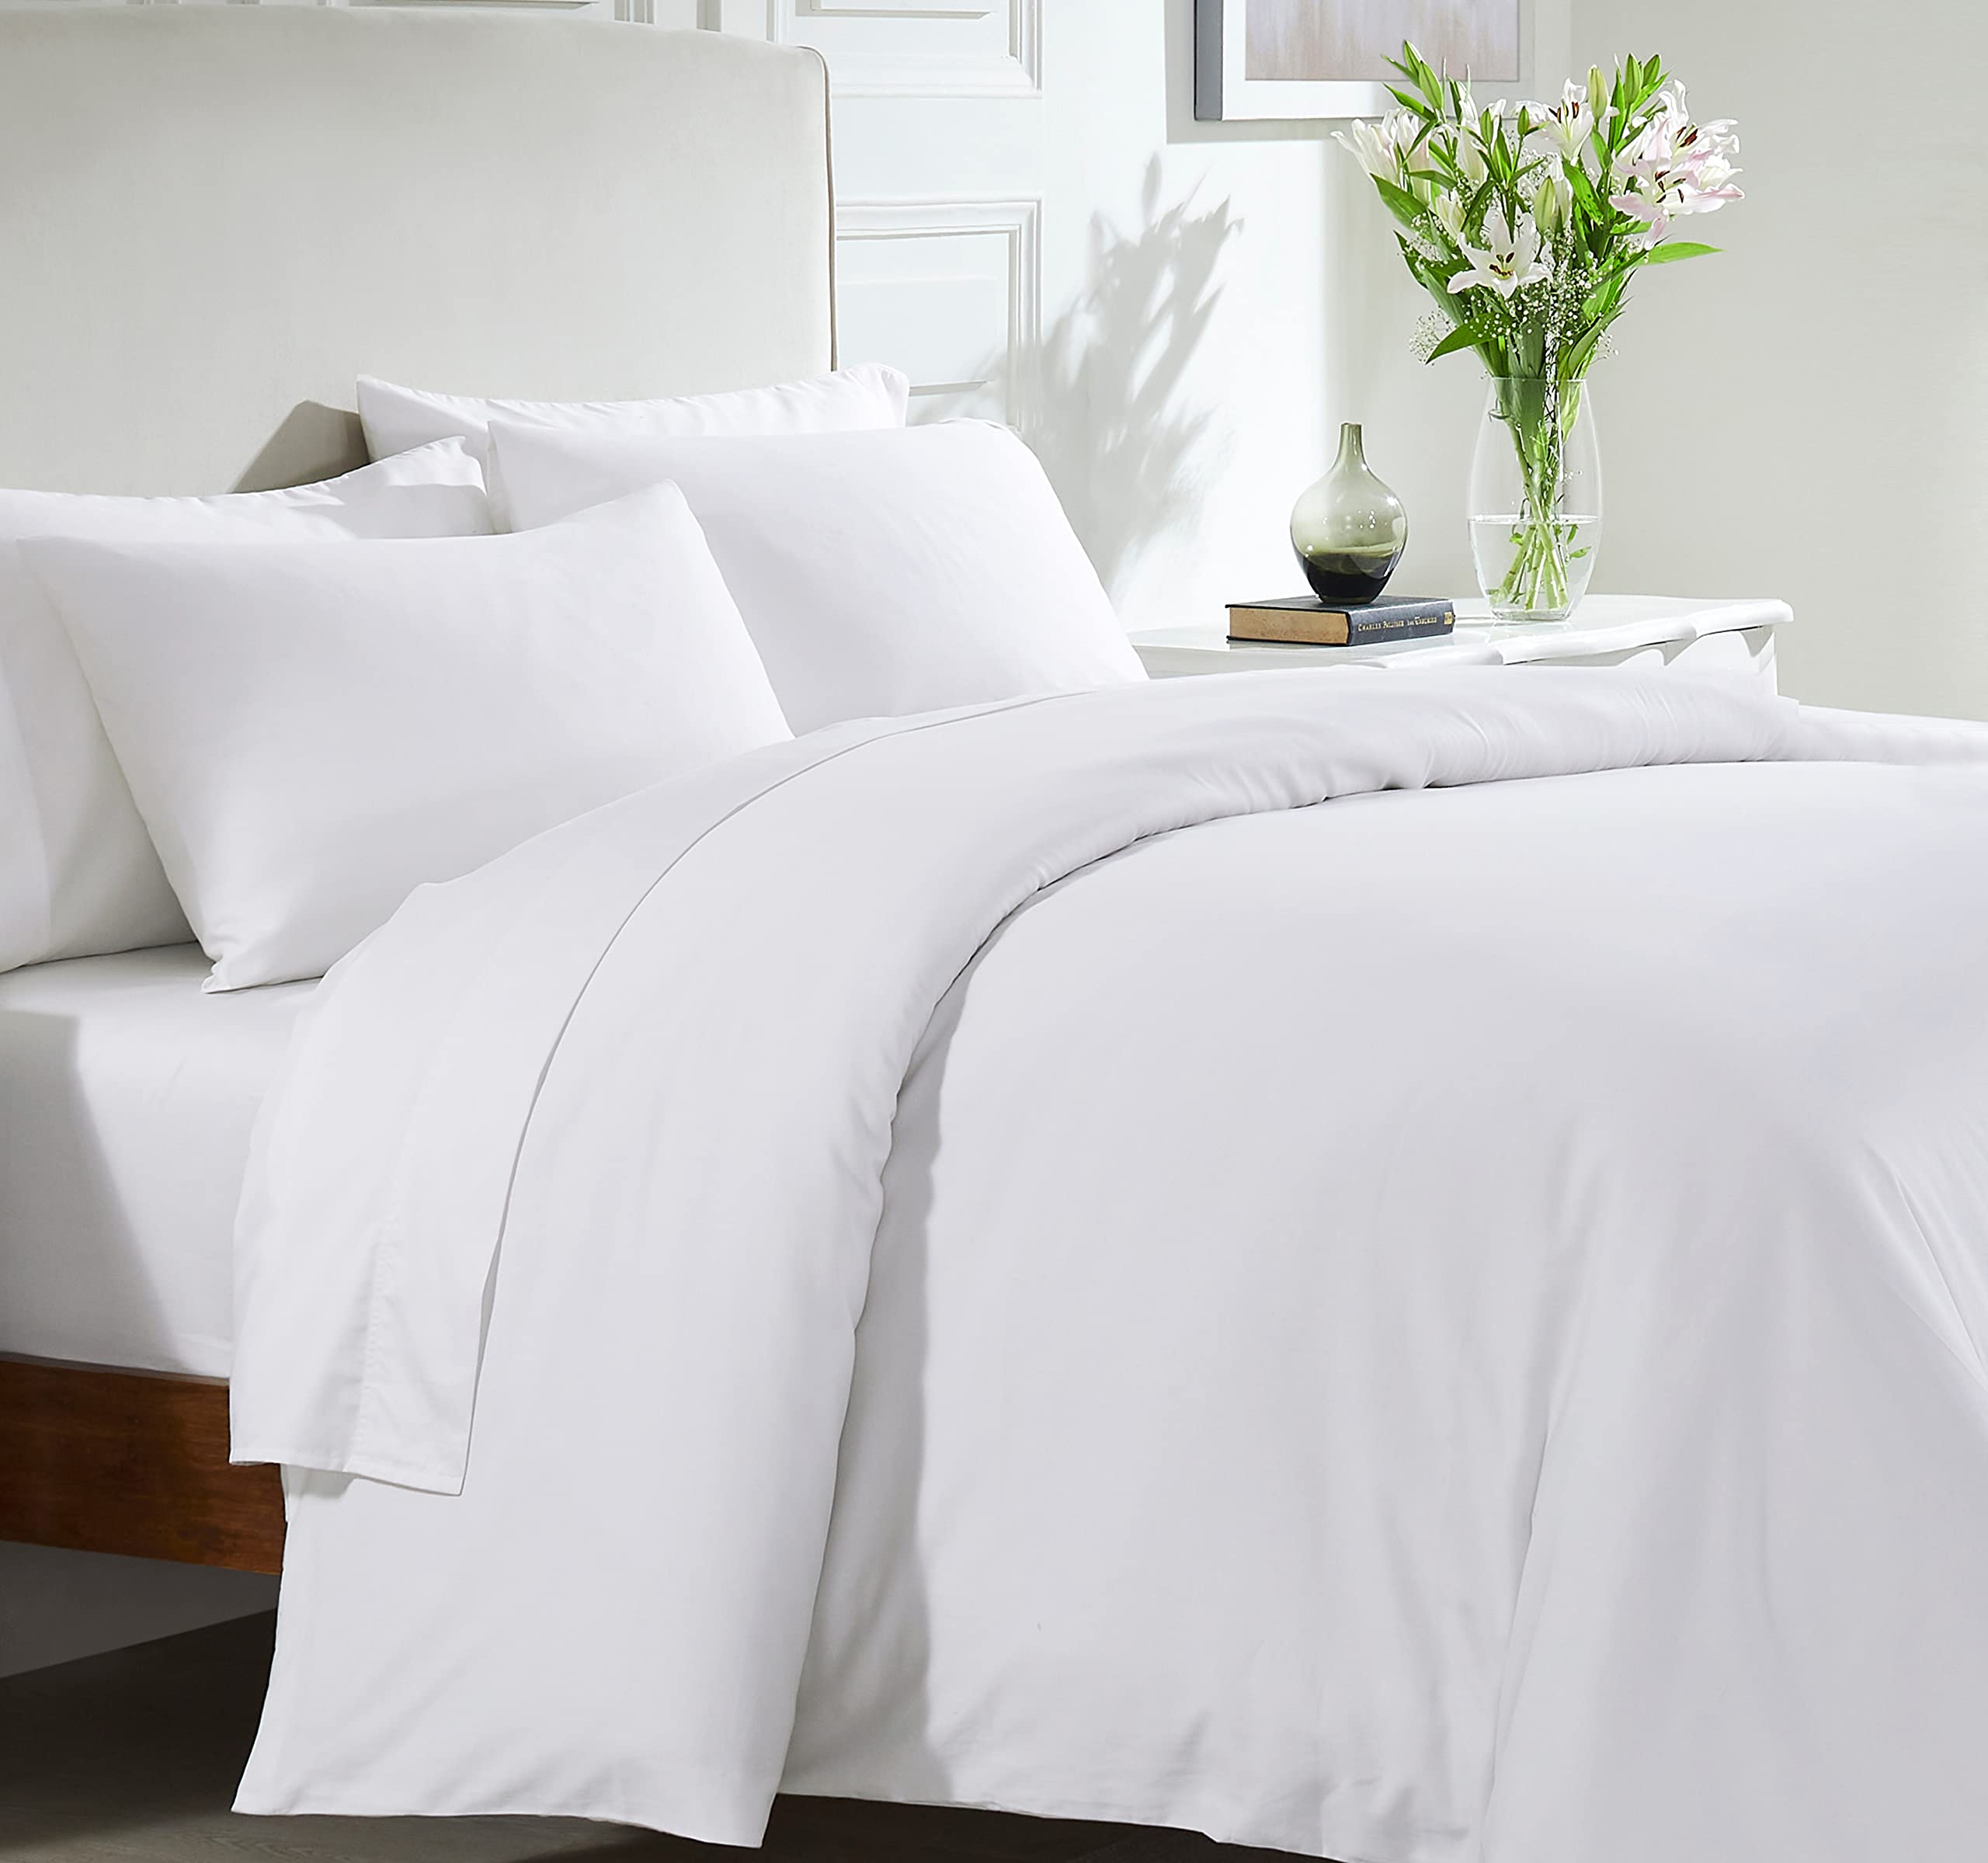 The Allure of Crisp White Bedding: Why Guests Prefer it in Hotels and Short-Term Rentals